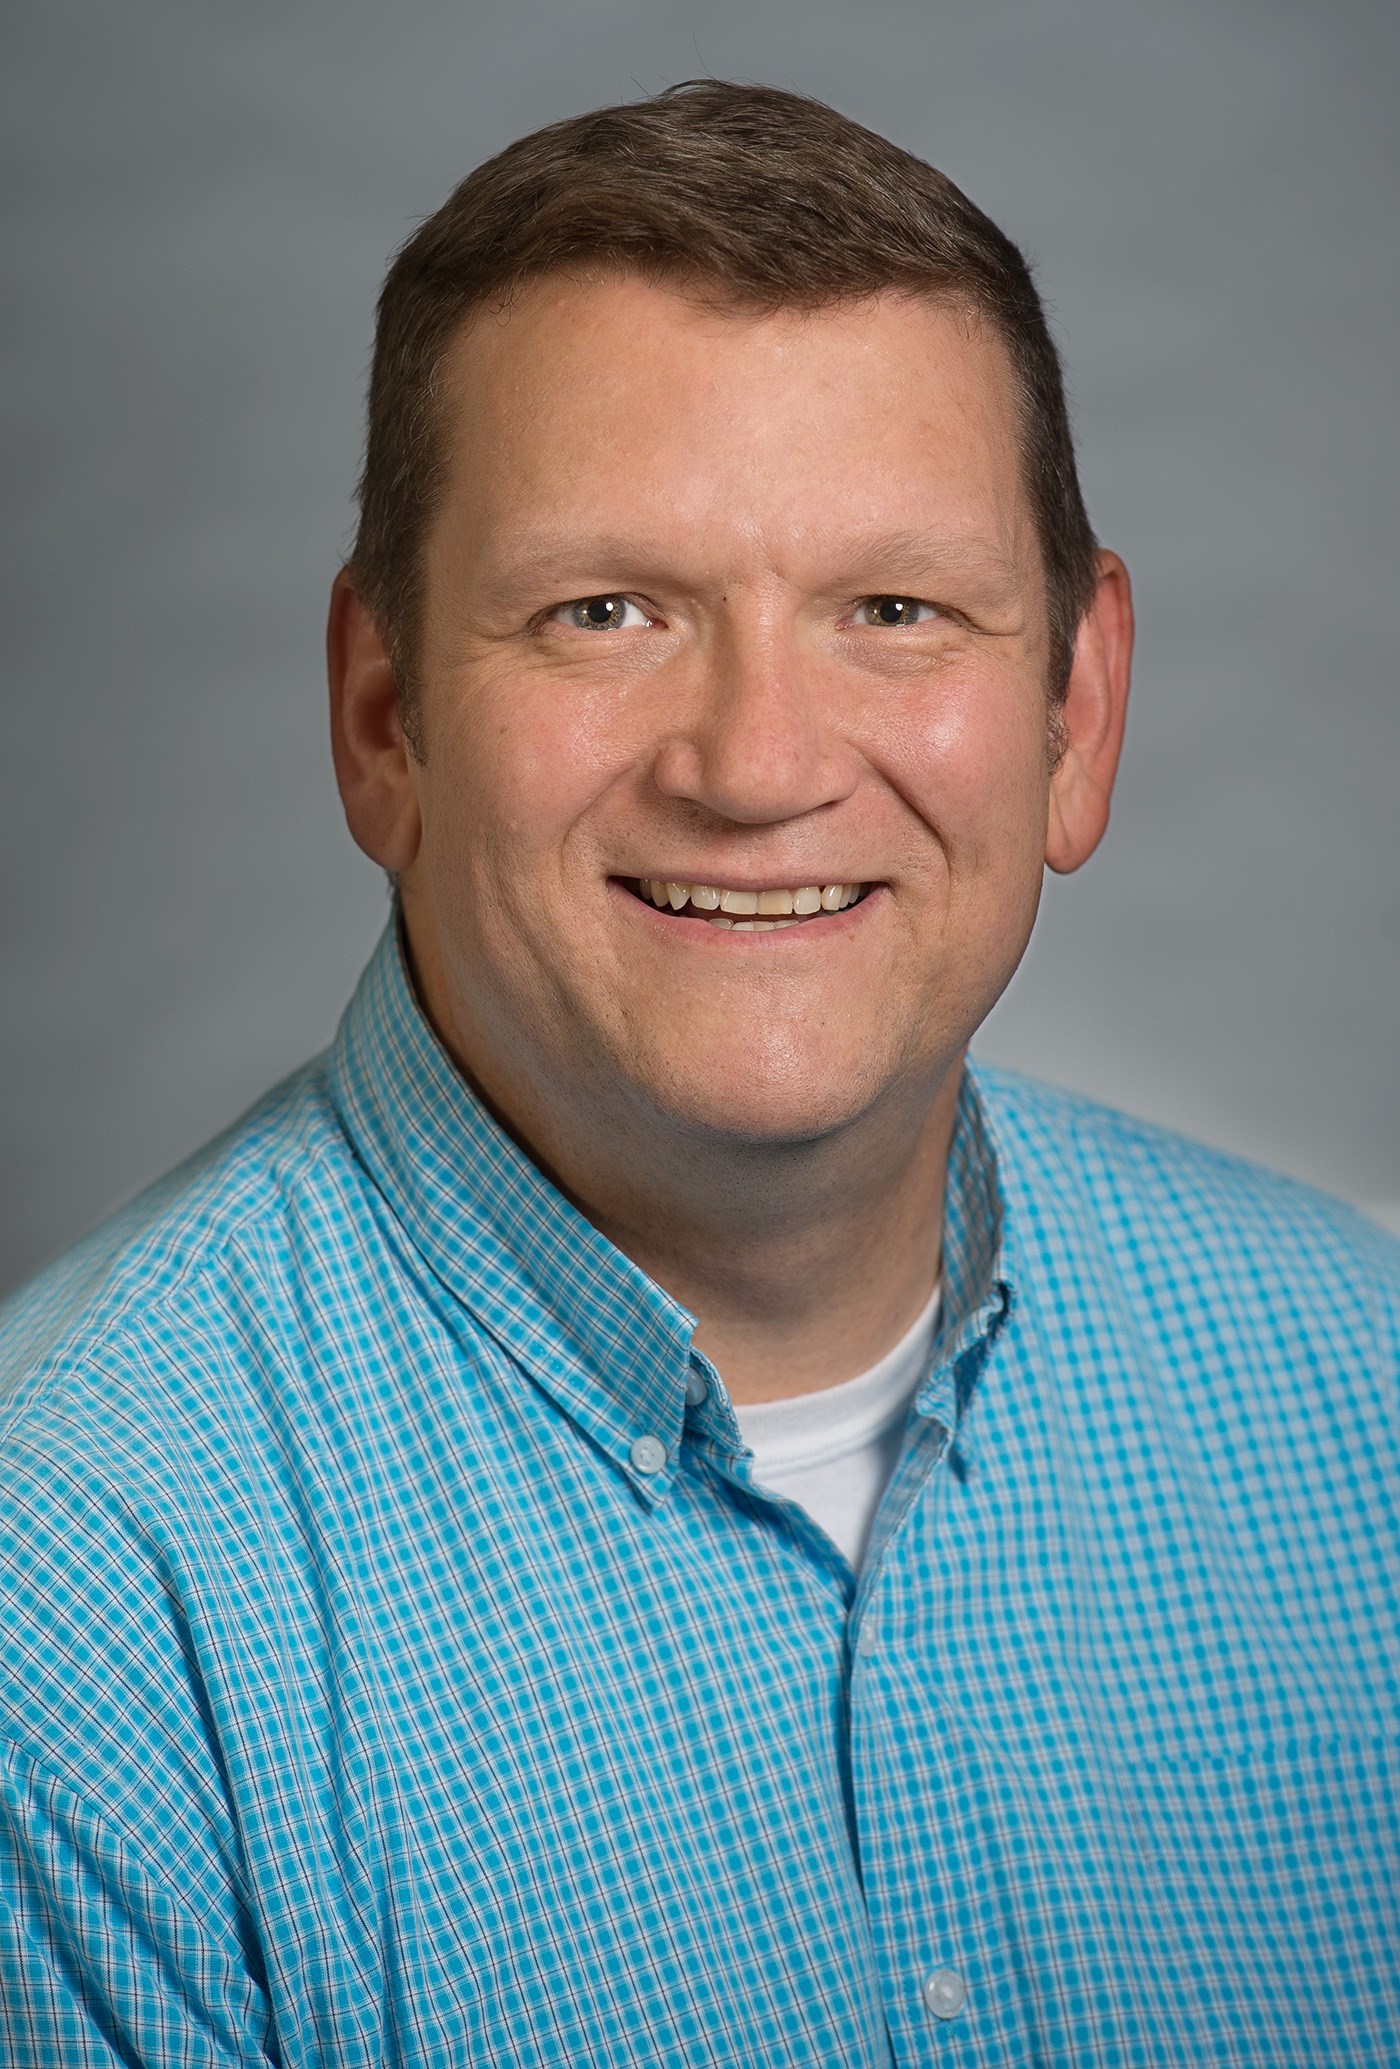 Edward Hajduk is the Associate Chair, Associate Teaching Professor in the COLLEGE Francis College of Engineering DEPARTMENT Civil and Environmental Engineering at UMass Lowell.